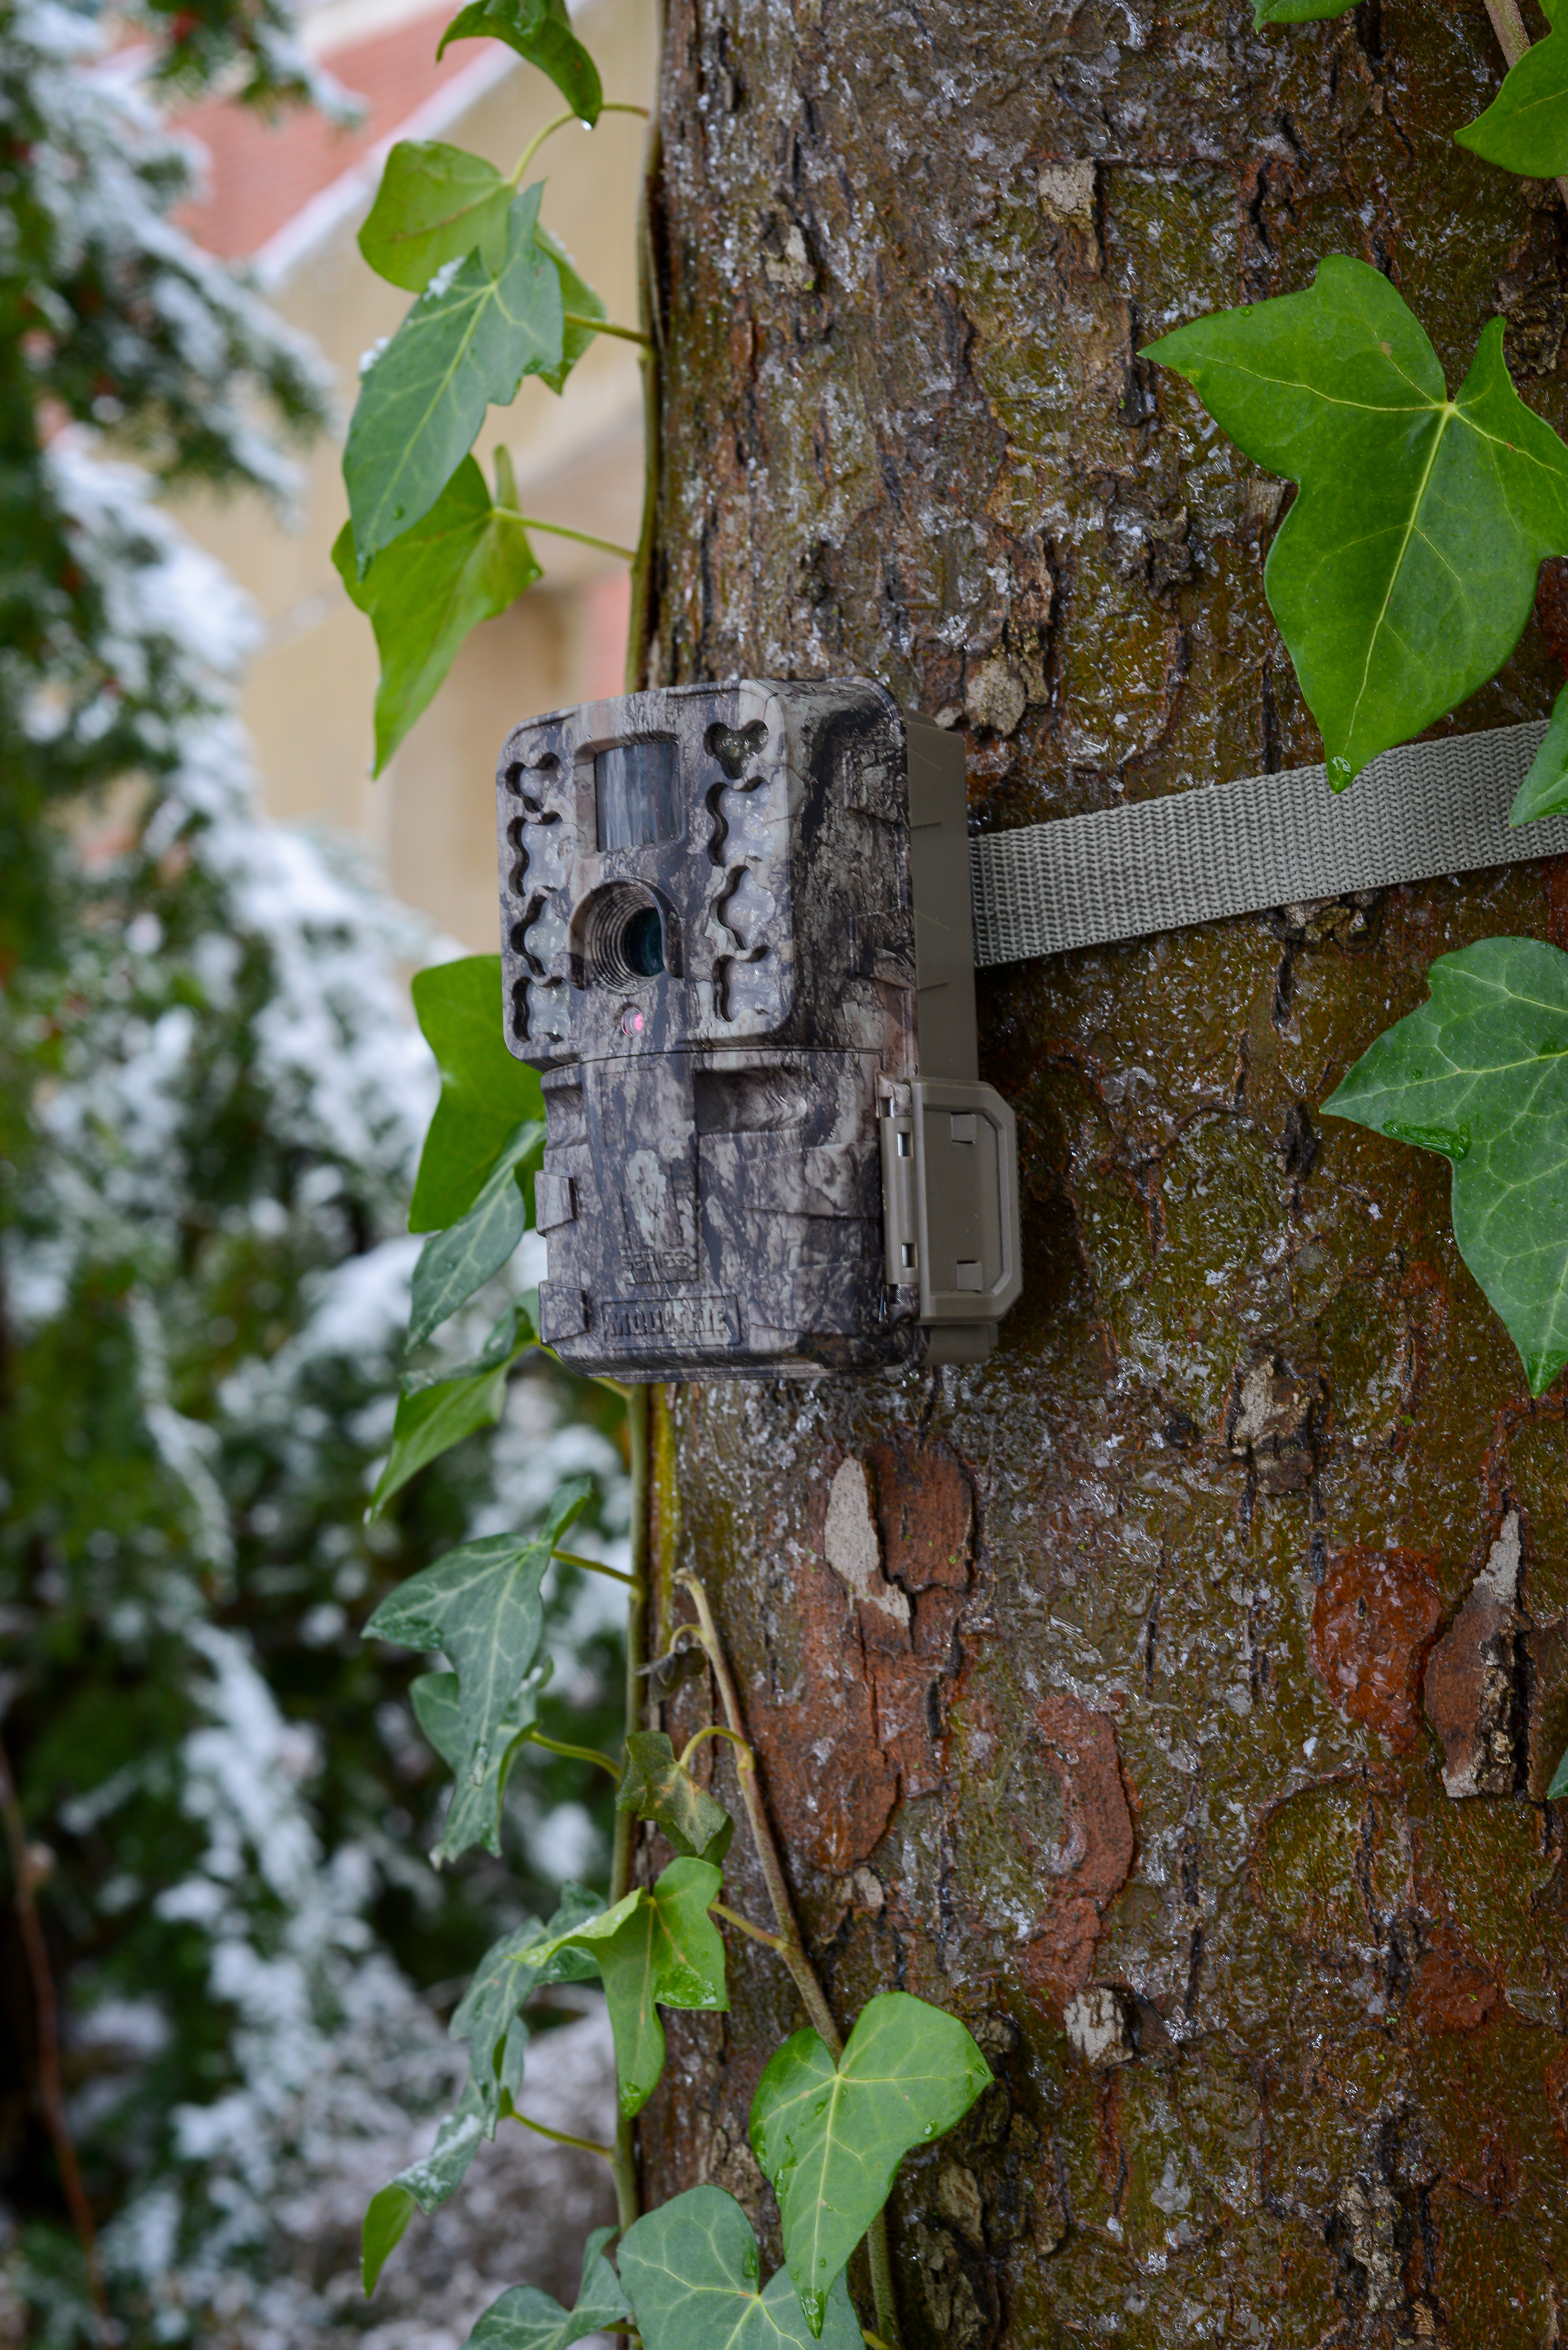 Closeup of trail camera strapped to a tree